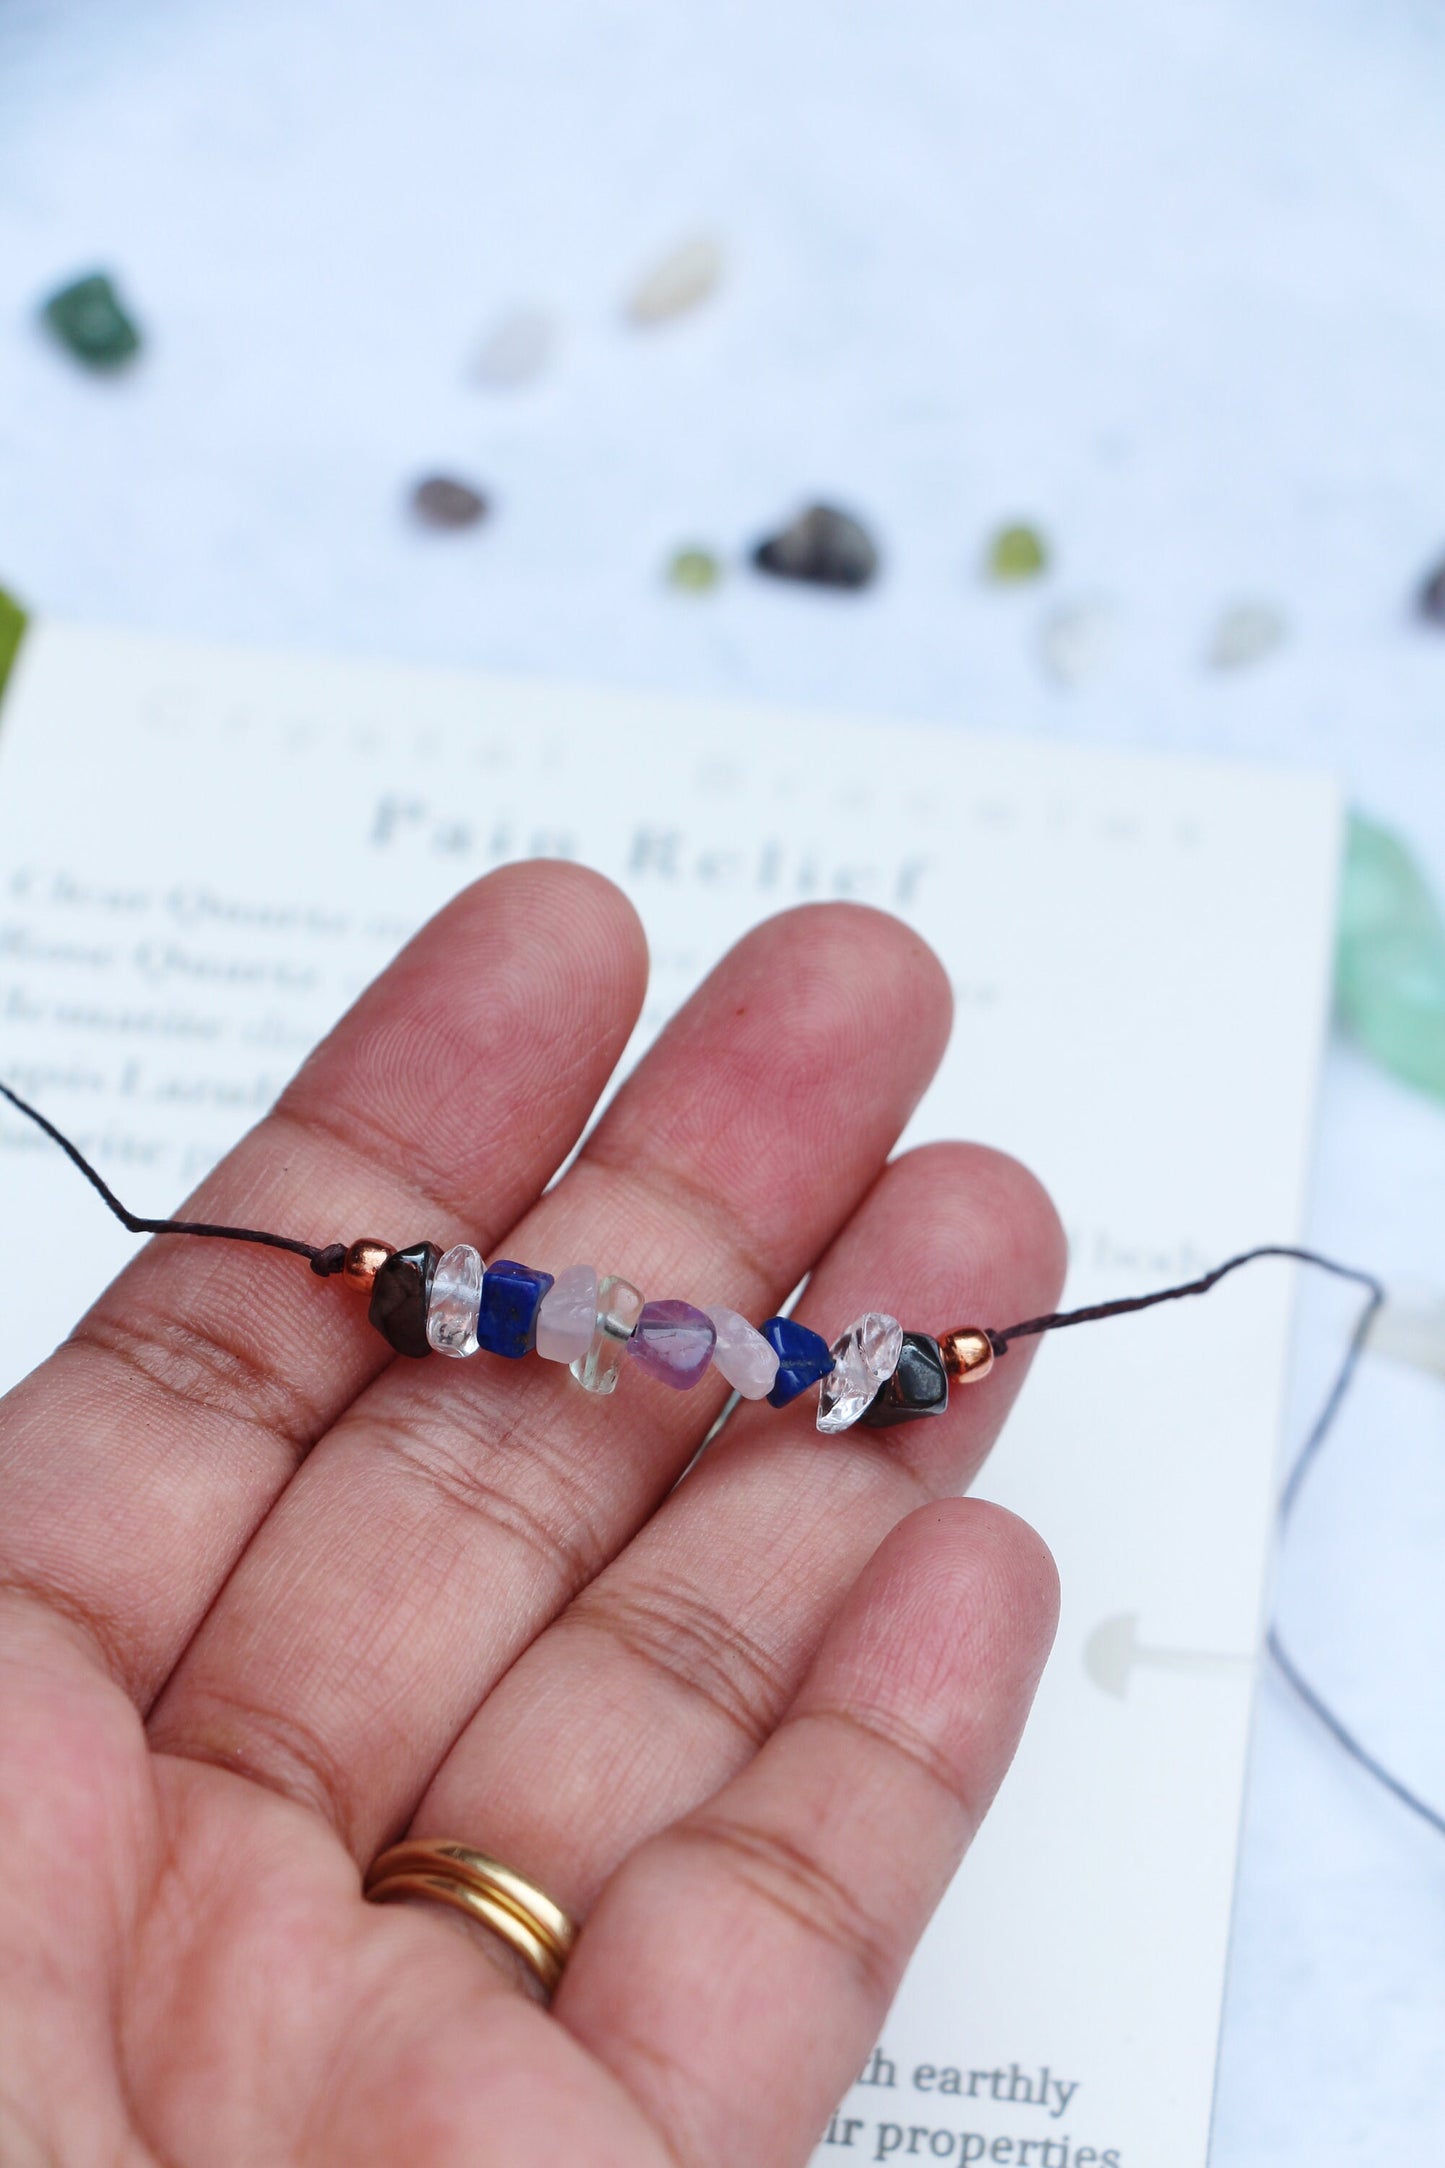 Pain Relief crystal bracelet/anklet - Eco friendly and sustainable - Tie closure - Theblueyogi